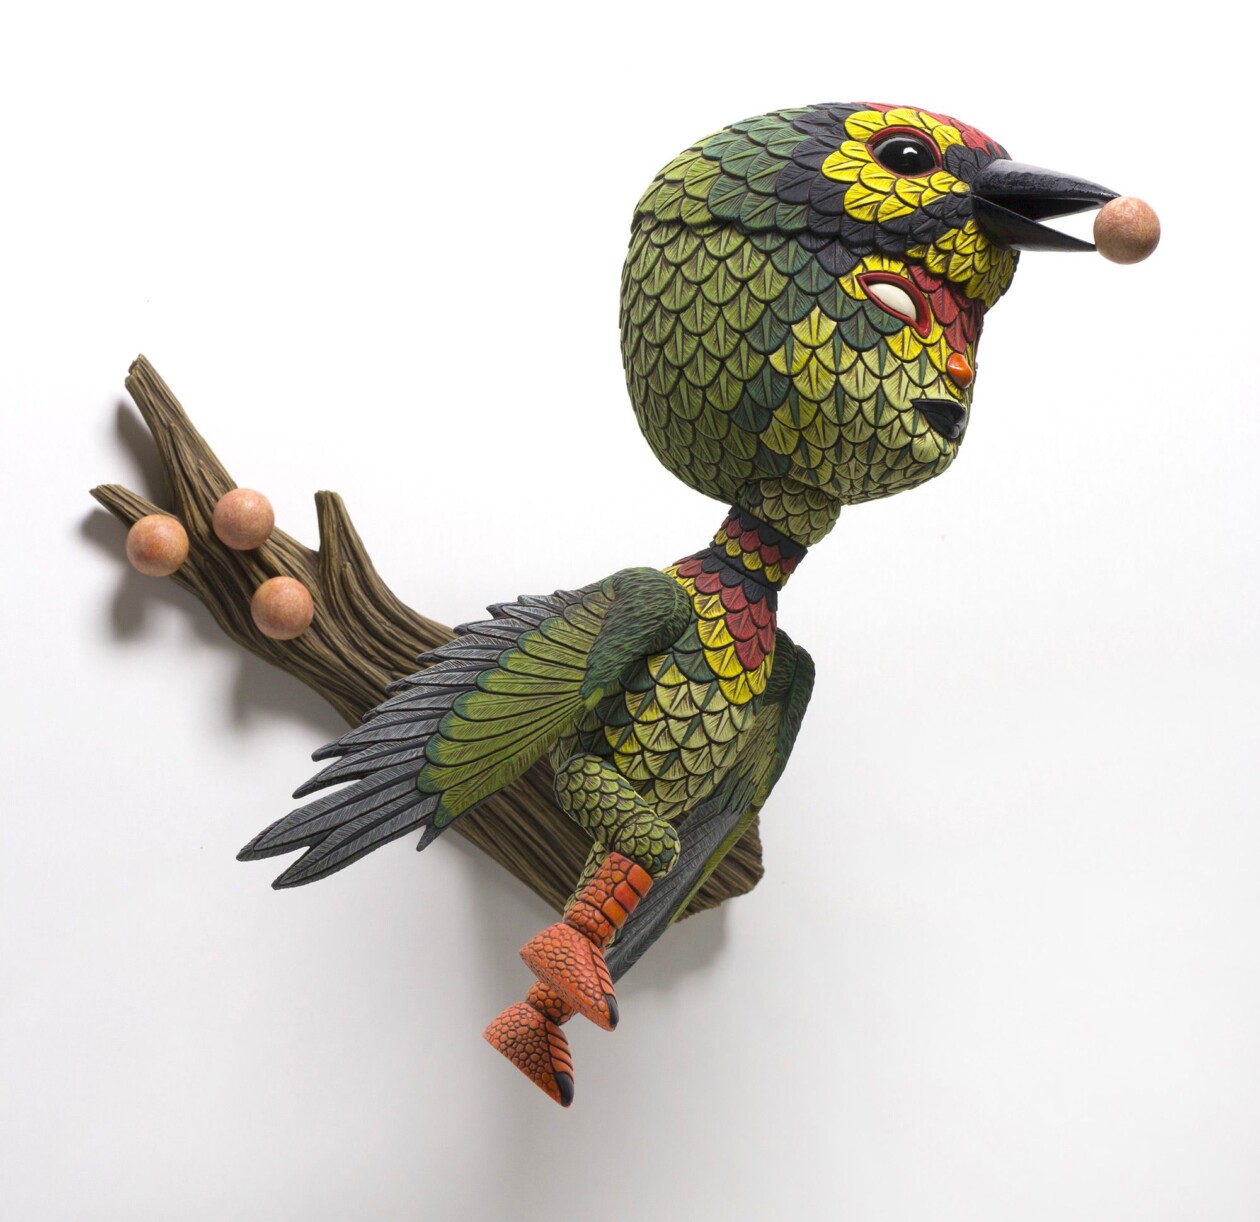 Marvelous Anthropomorphized Bird Sculptures By Calvin Ma (9)